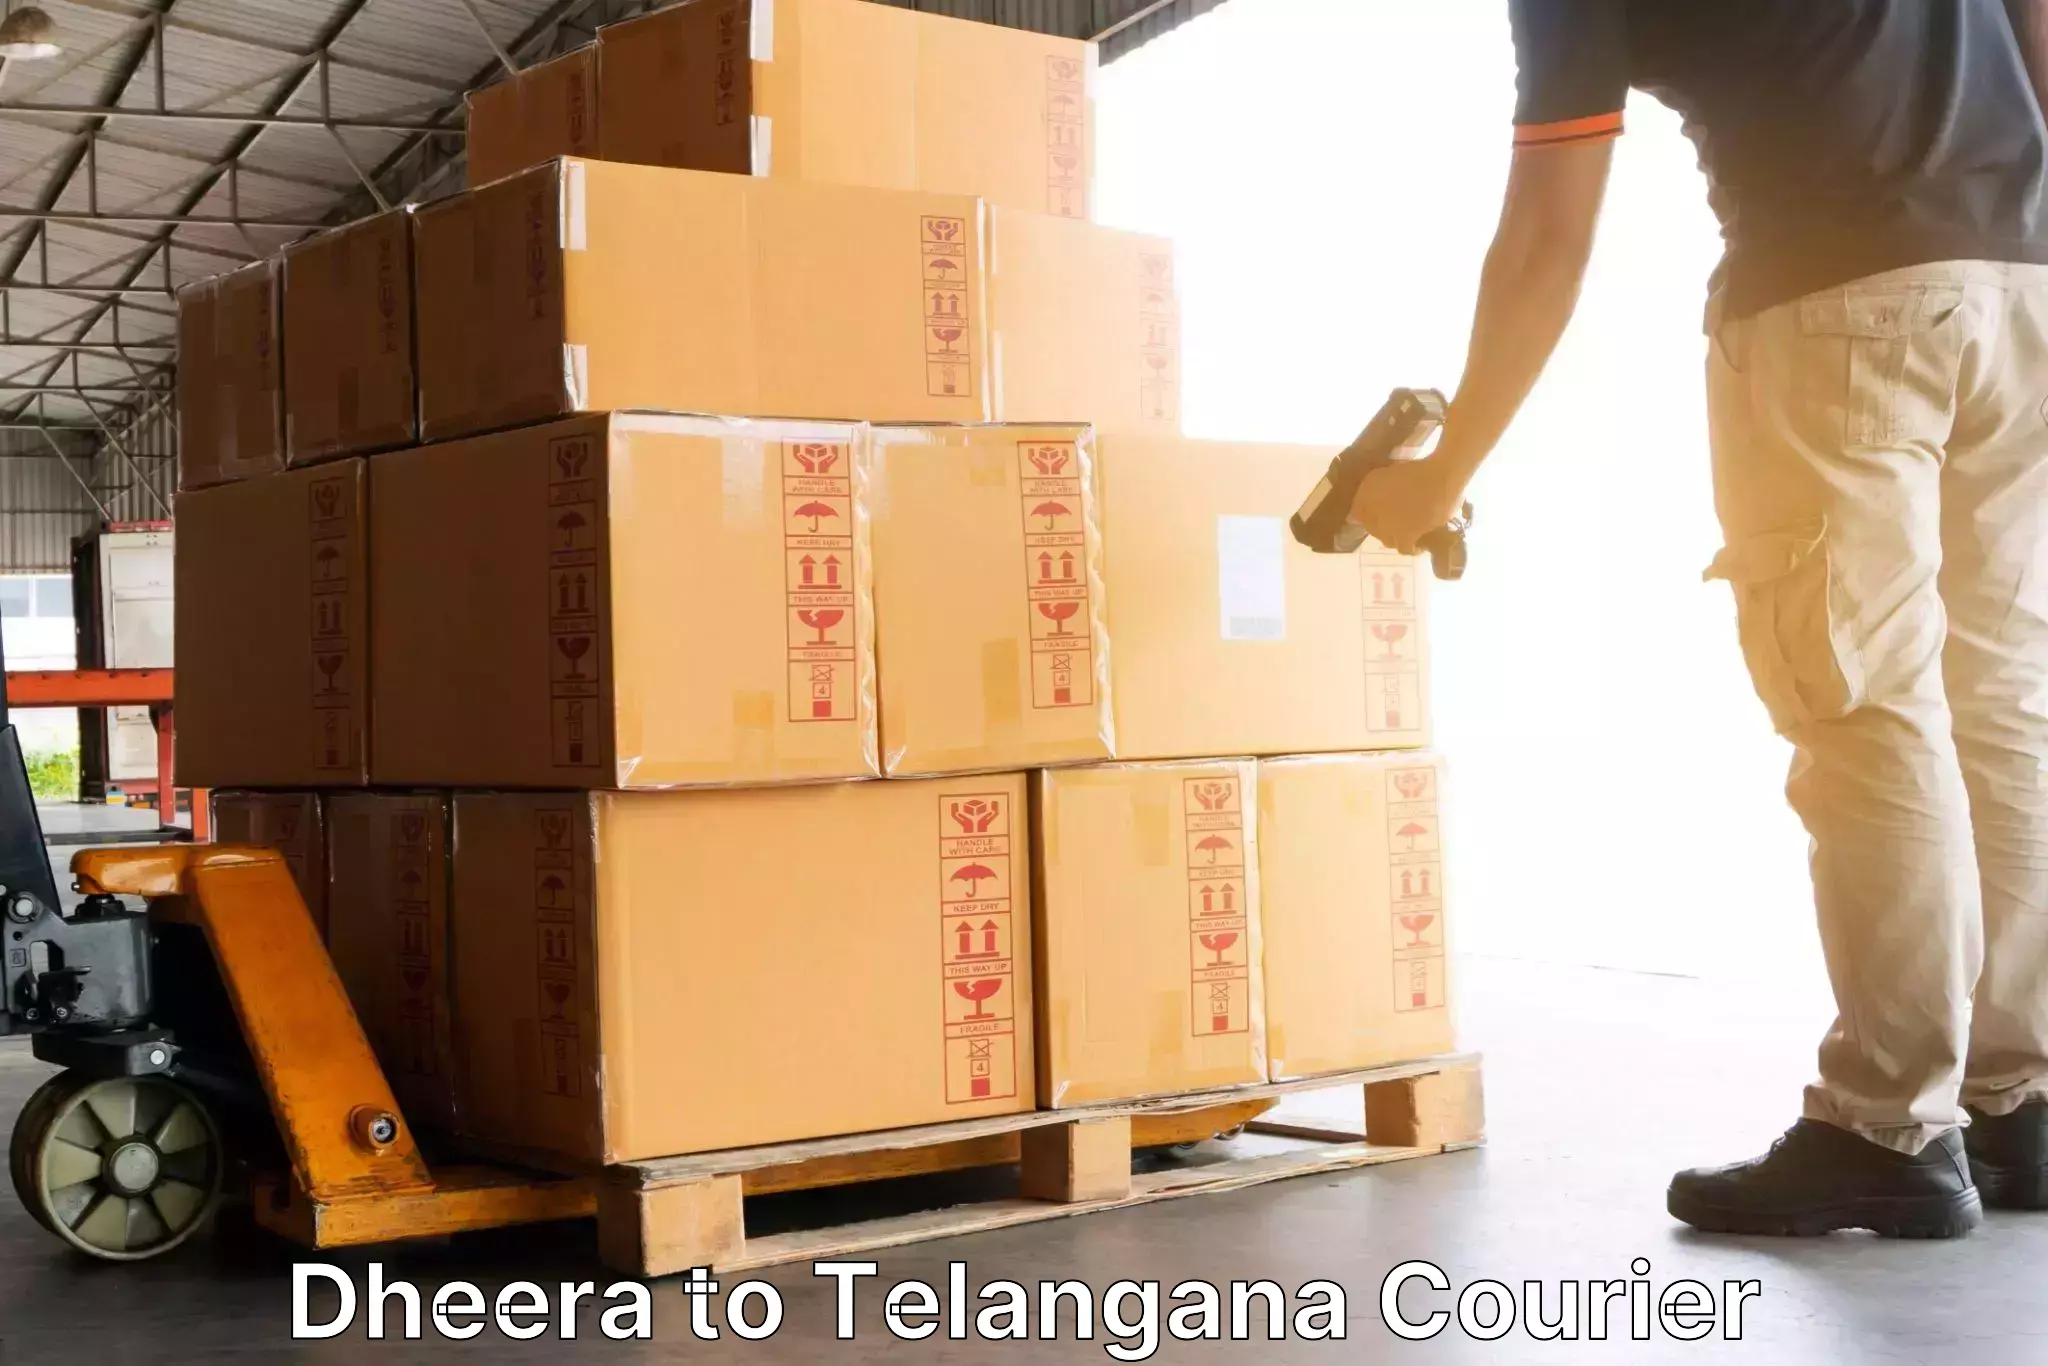 Next-day delivery options Dheera to Nirmal